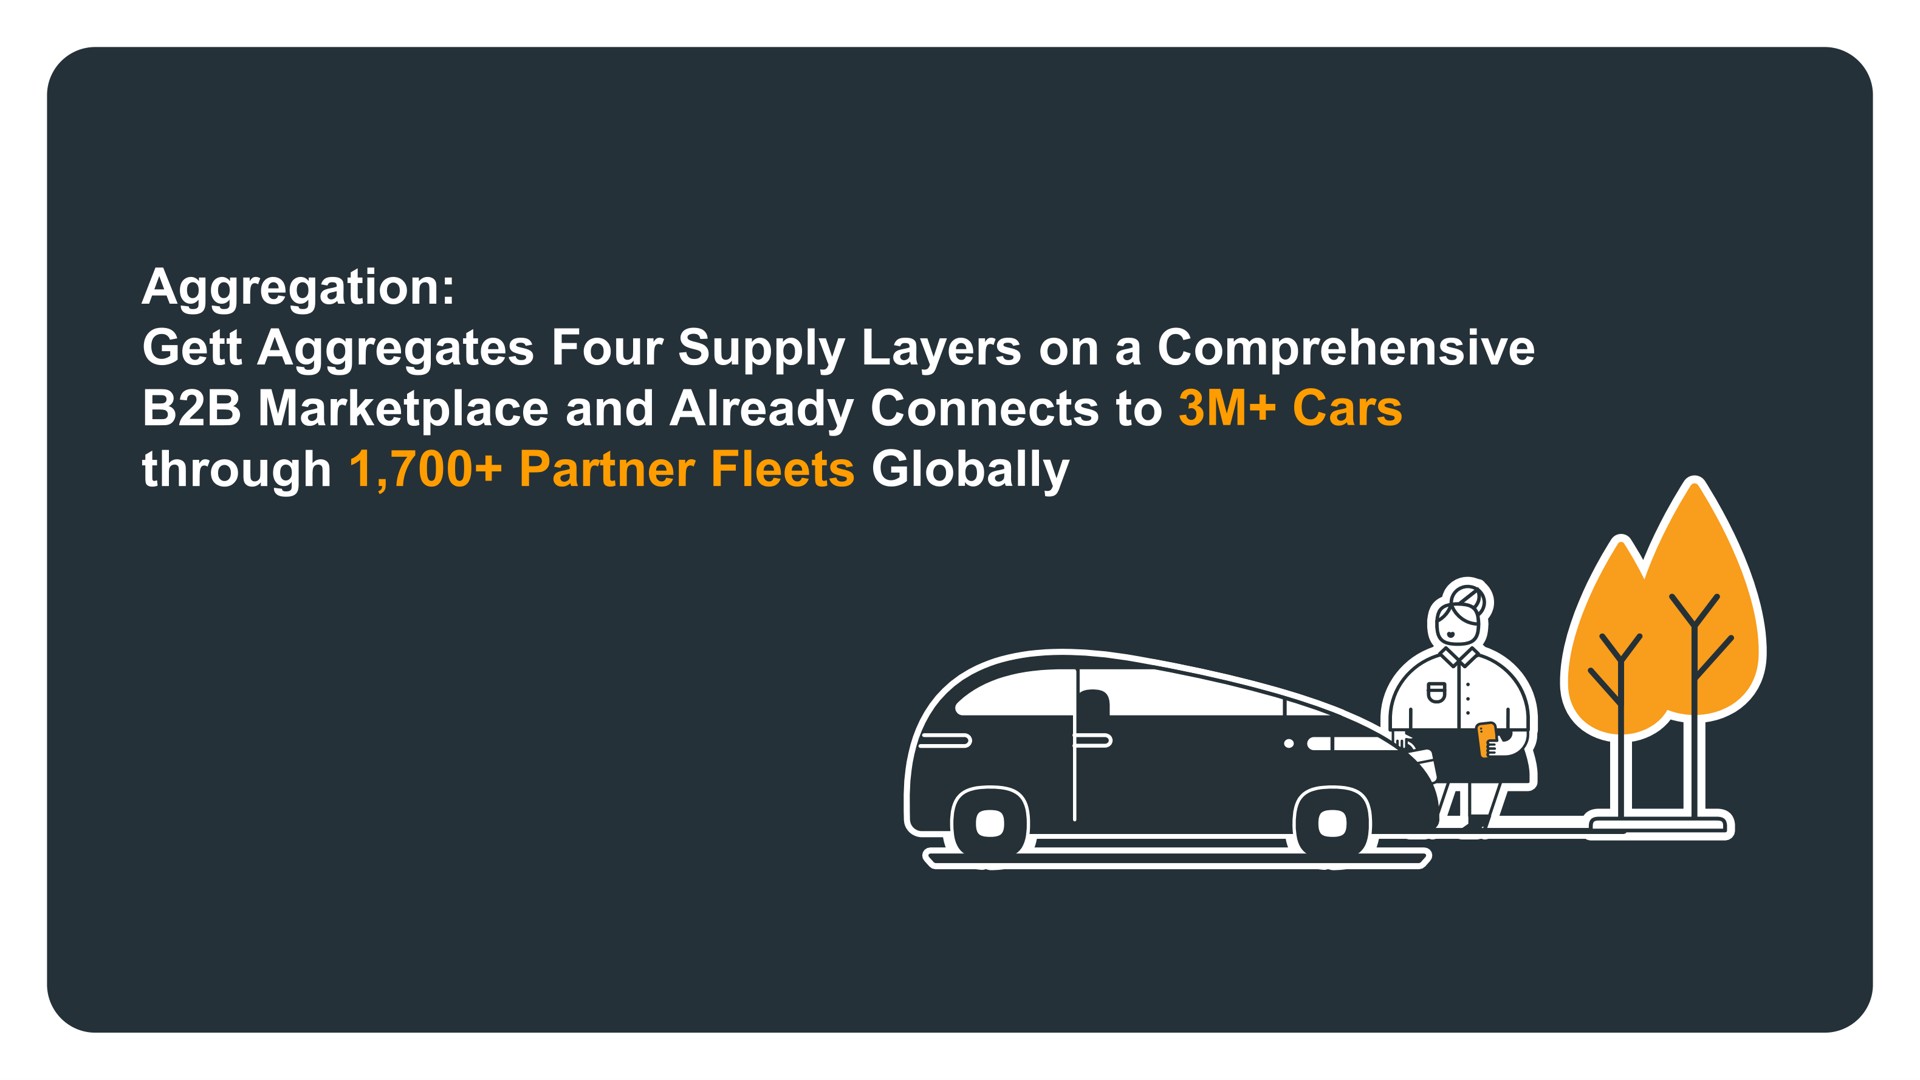 aggregation aggregates four supply layers on a comprehensive and already connects to cars through partner fleets globally | Gett